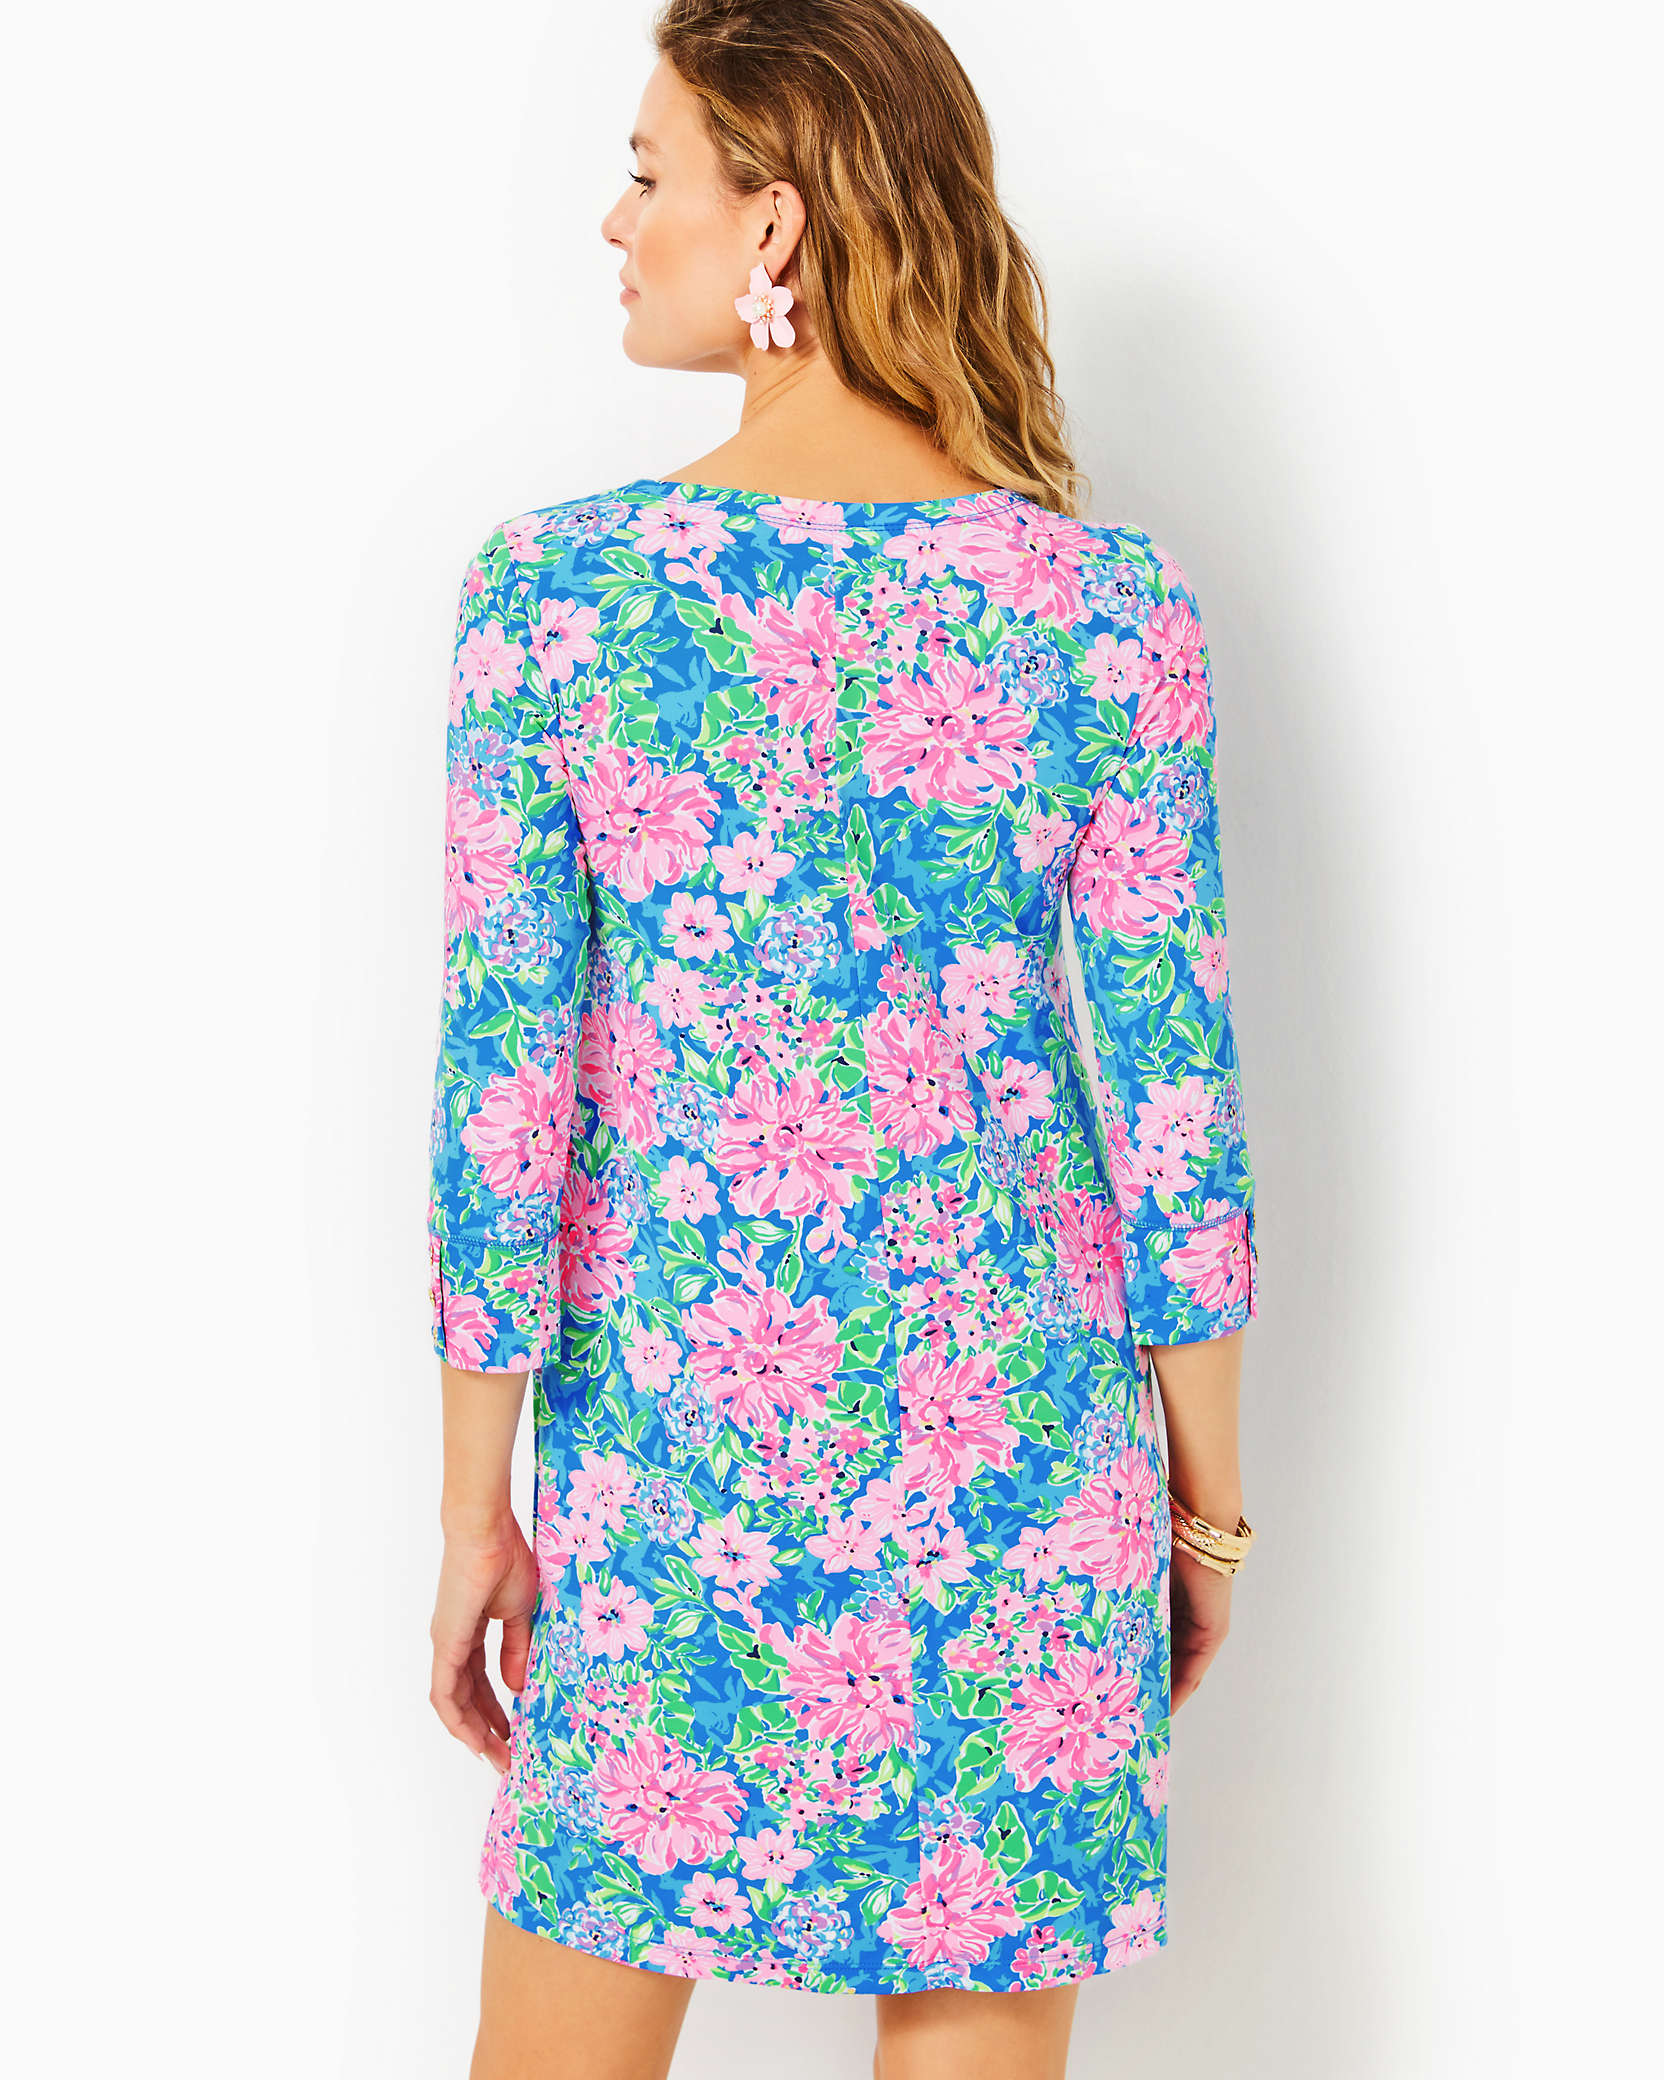 Shop Lilly Pulitzer Upf 50+ Solia Chillylilly Dress In Multi Spring In Your Step